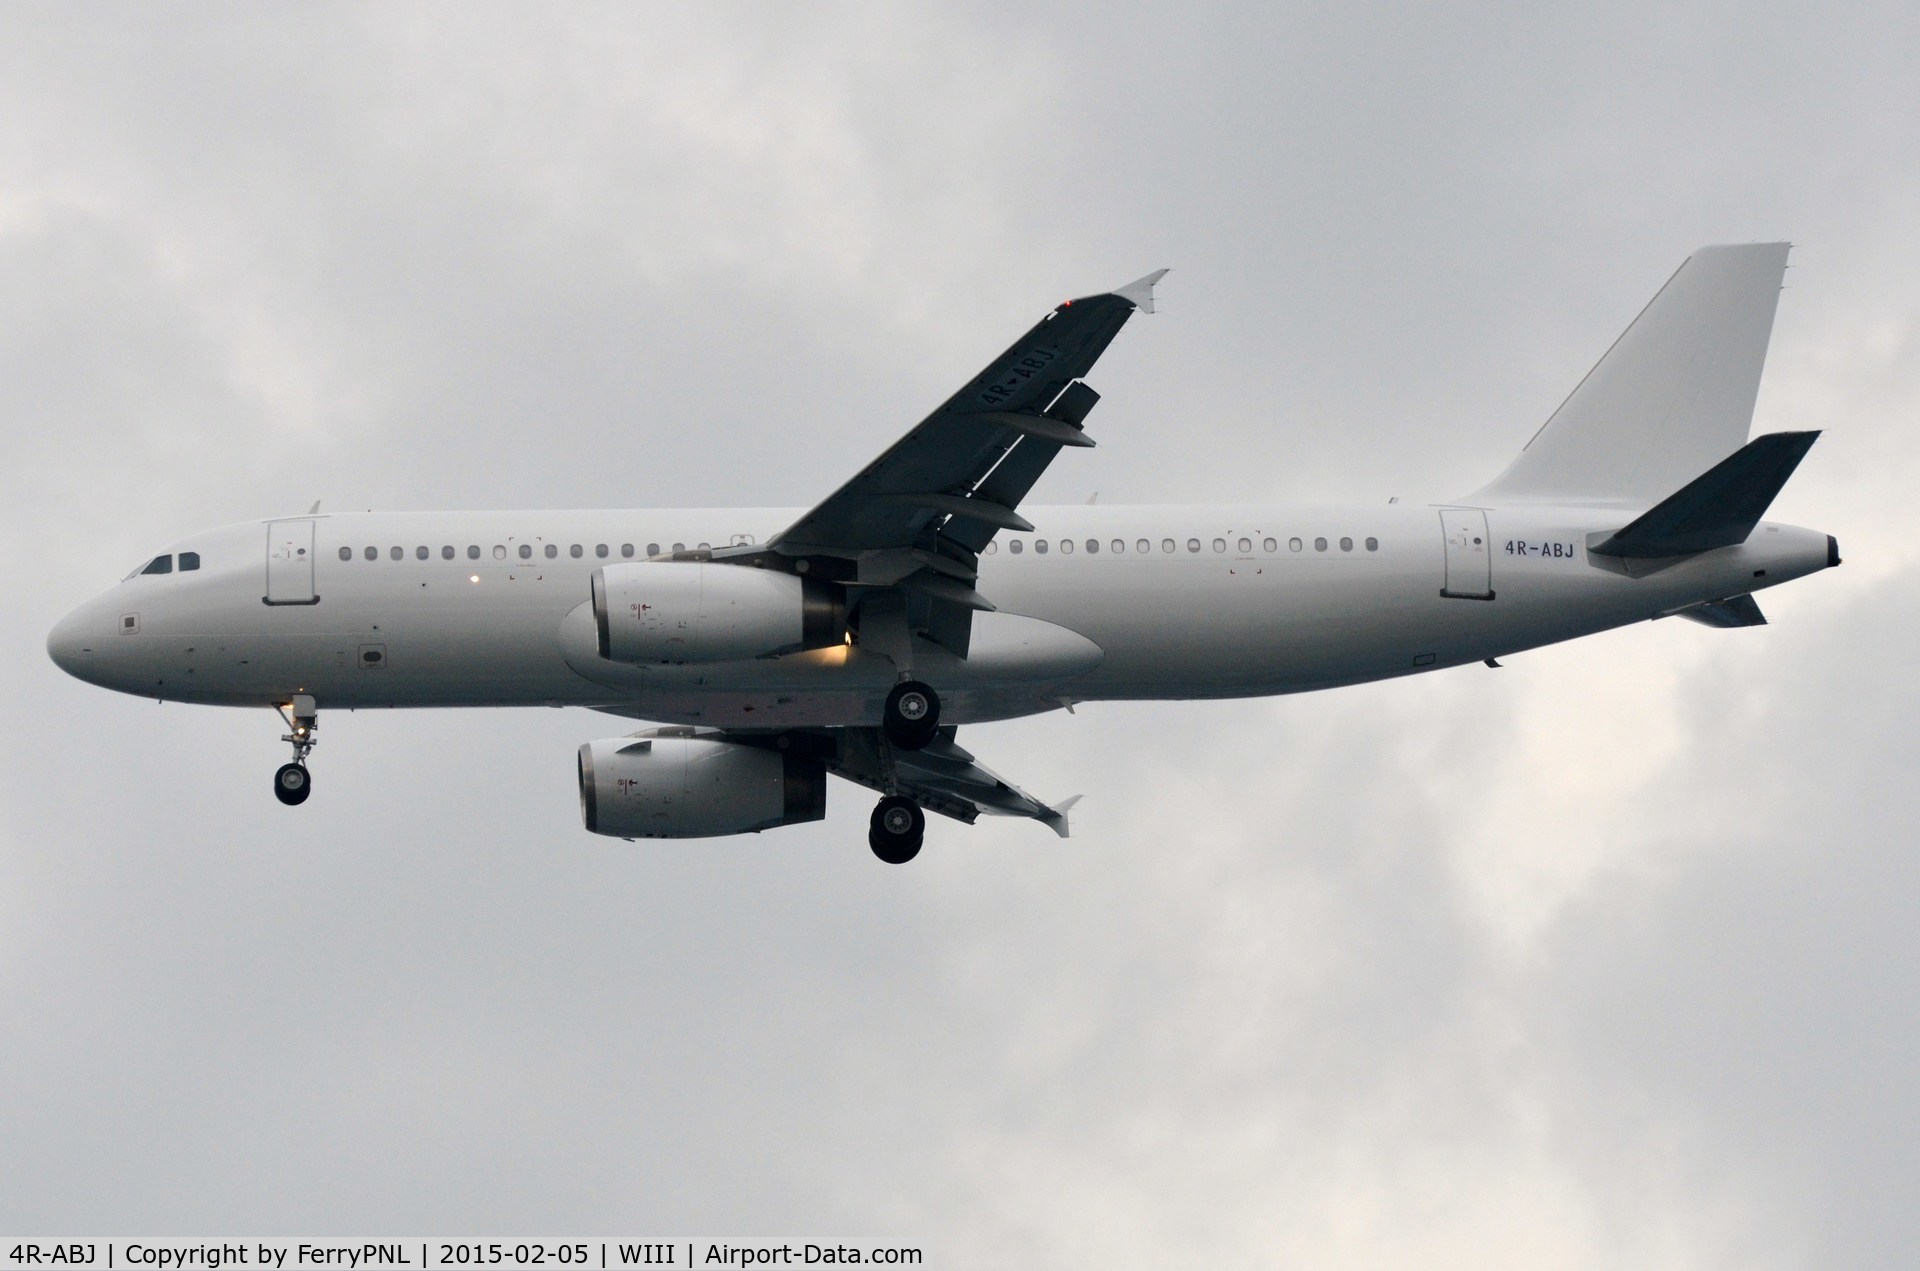 4R-ABJ, 2005 Airbus A320-232 C/N 2564, Completely white Srilankan A320 with registration stickered as this aircraft will be leased to Titan Airways from March 2015 as G-POWM.